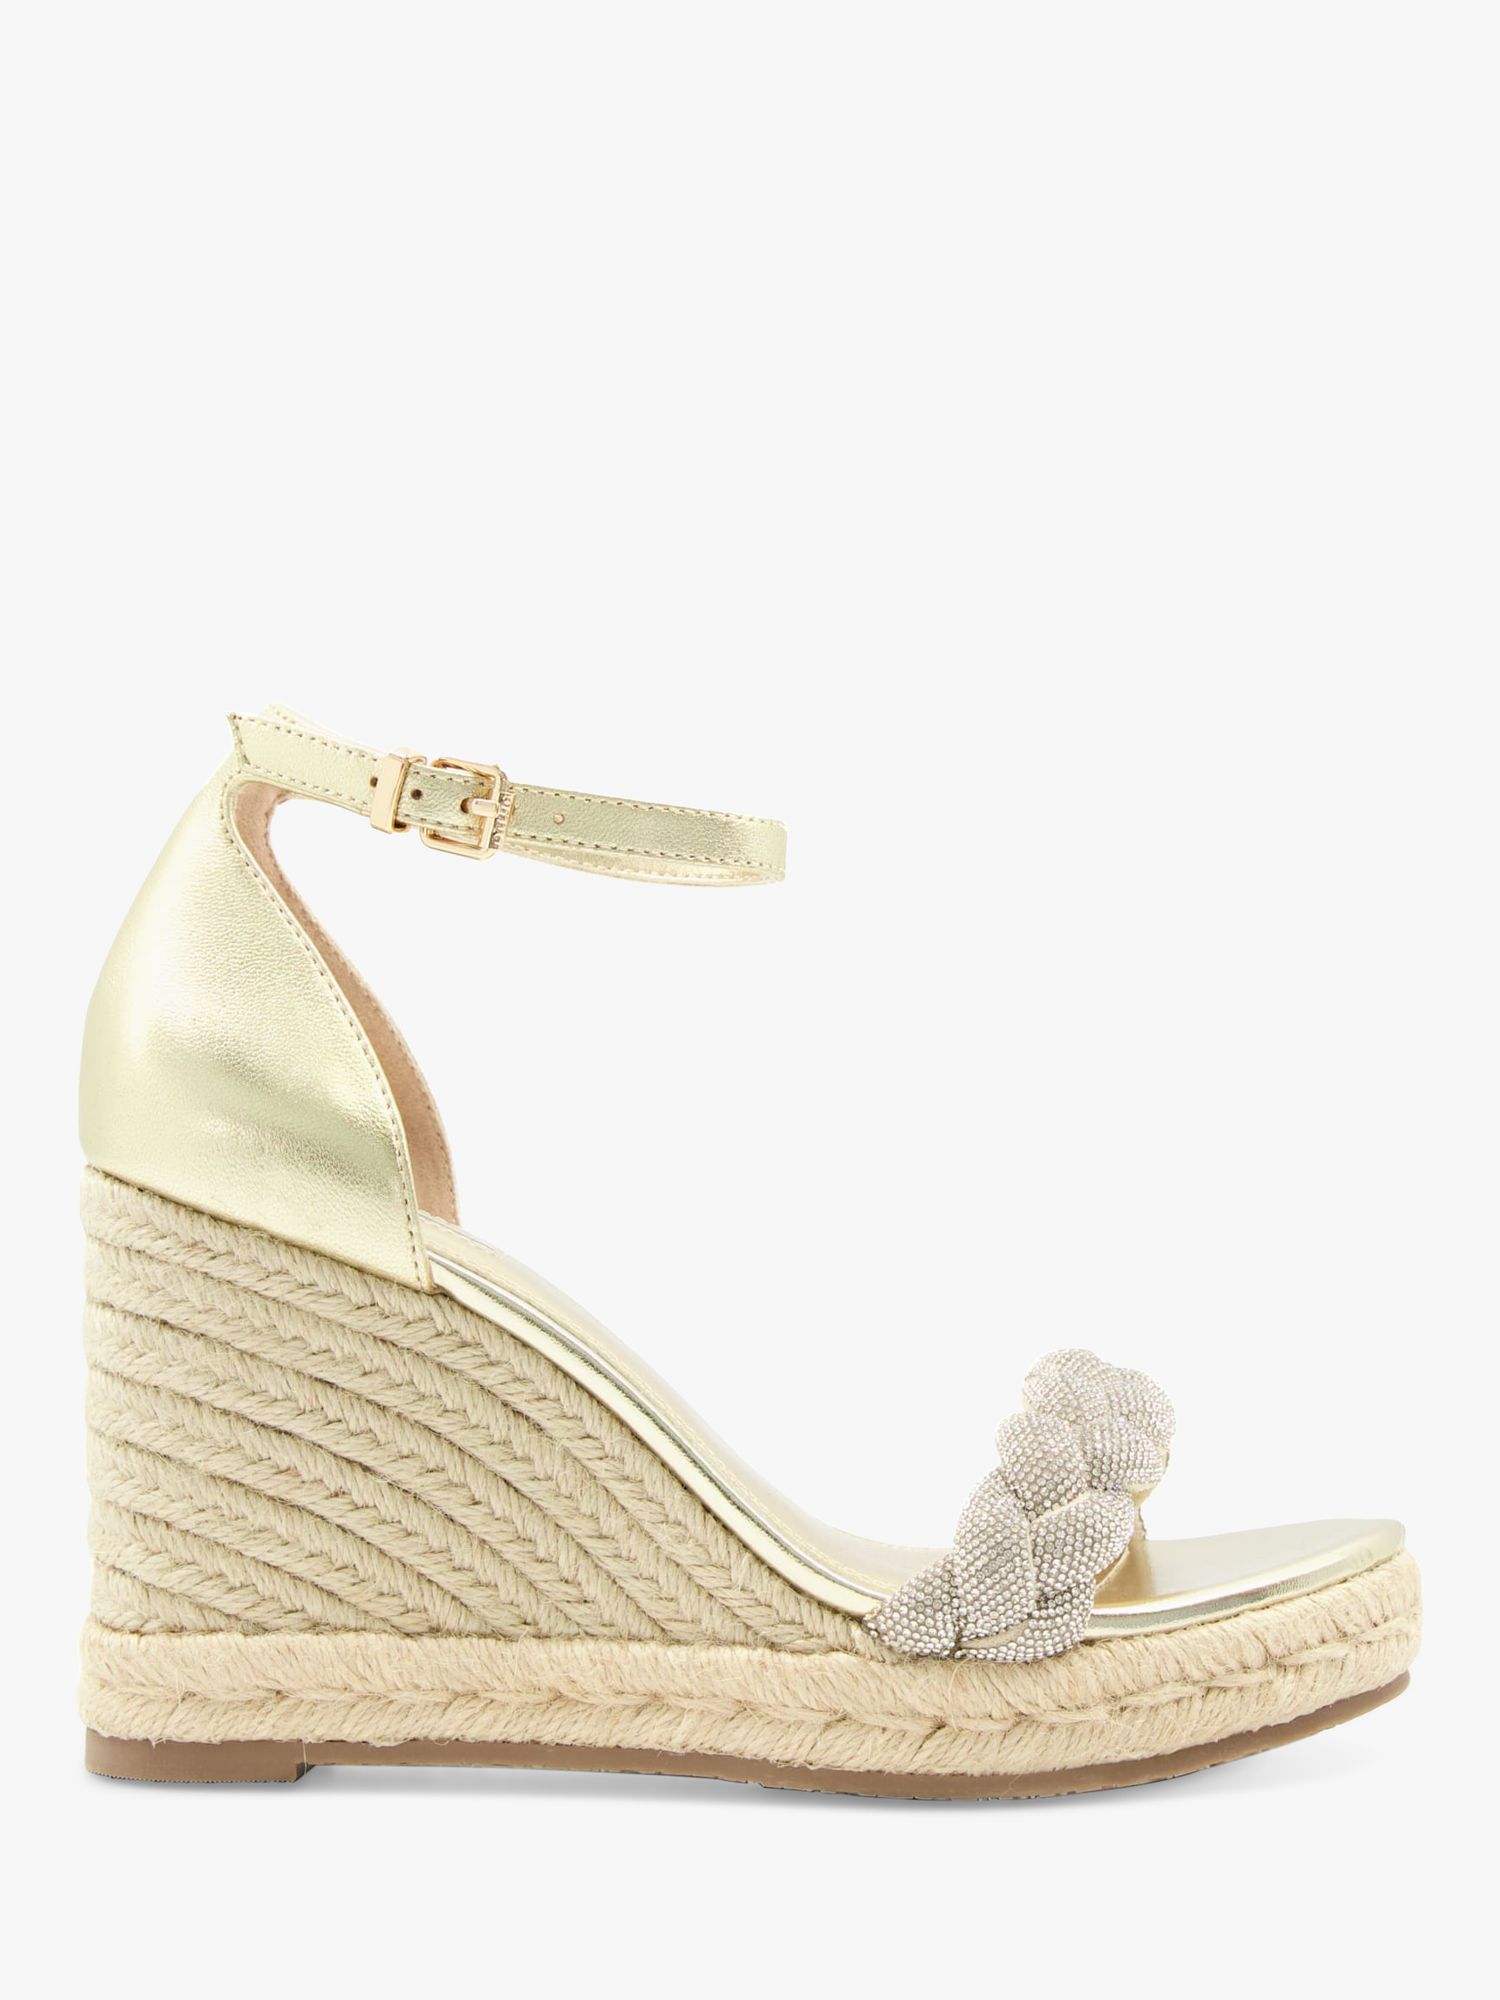 Dune Kingdom Leather Wedge Sandals, Gold at John Lewis & Partners